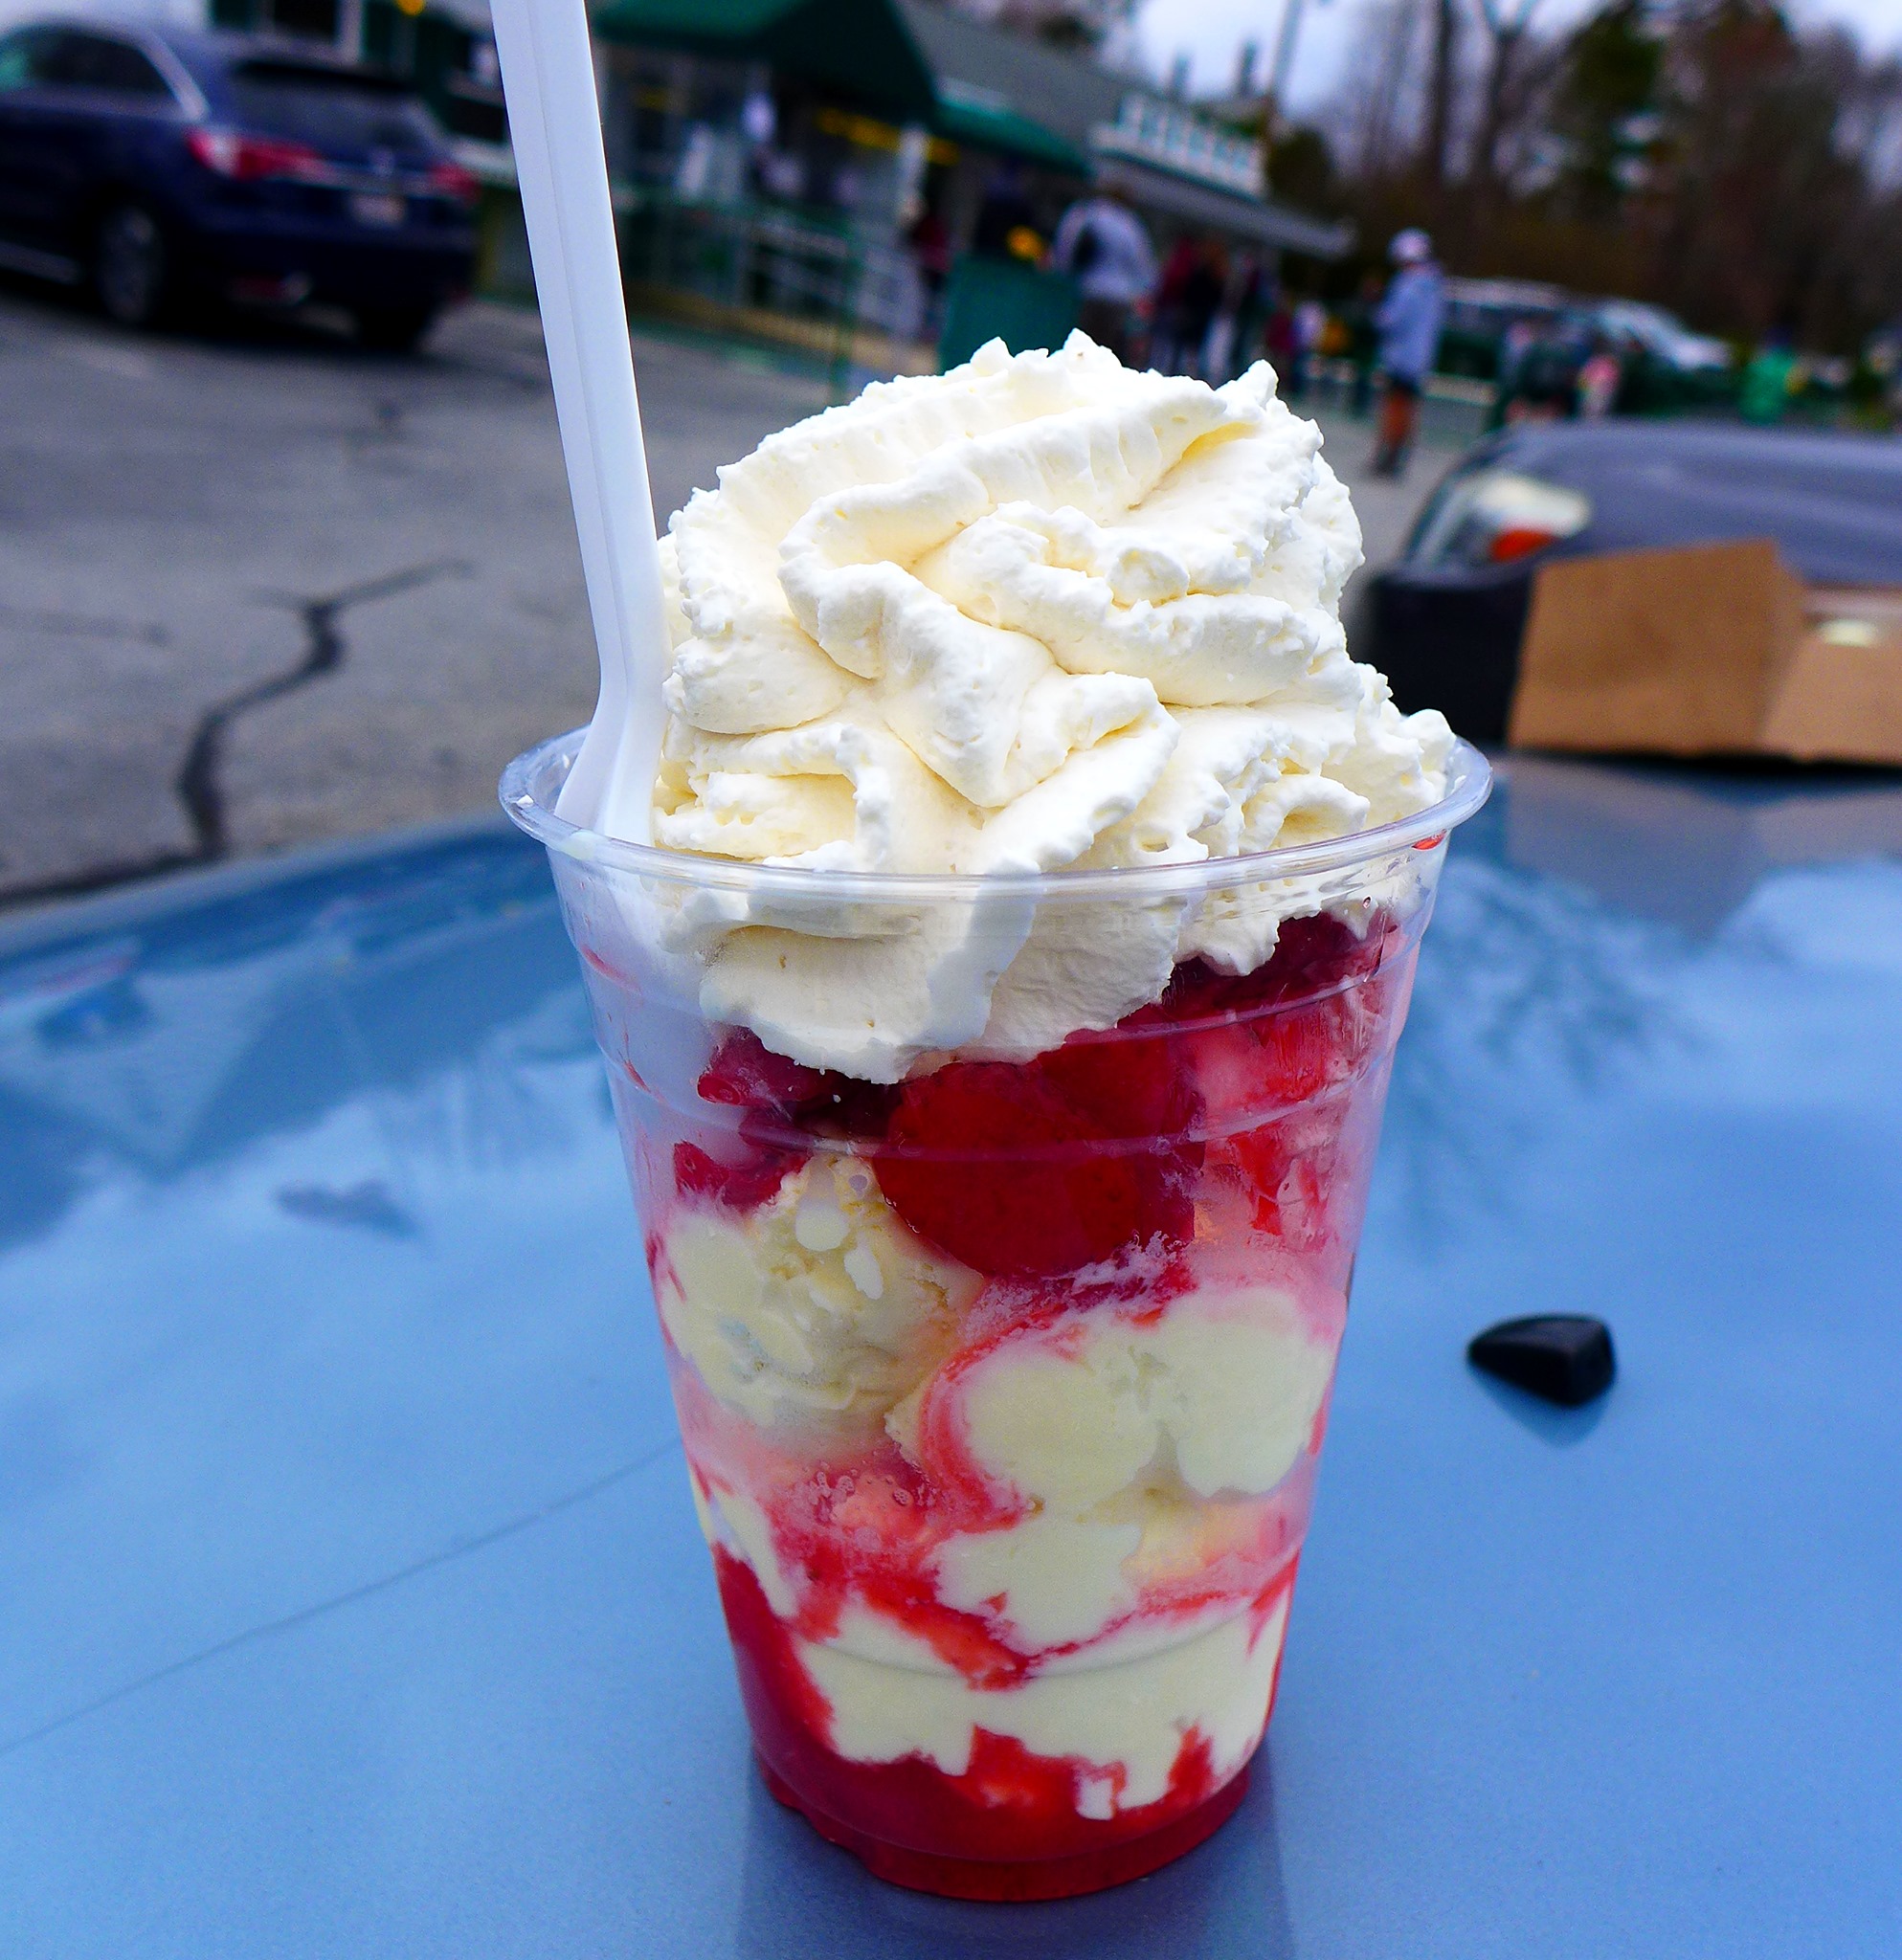 Strawberry Brook Blast from Bubbling Brook Ice Cream in Westwood, MA..